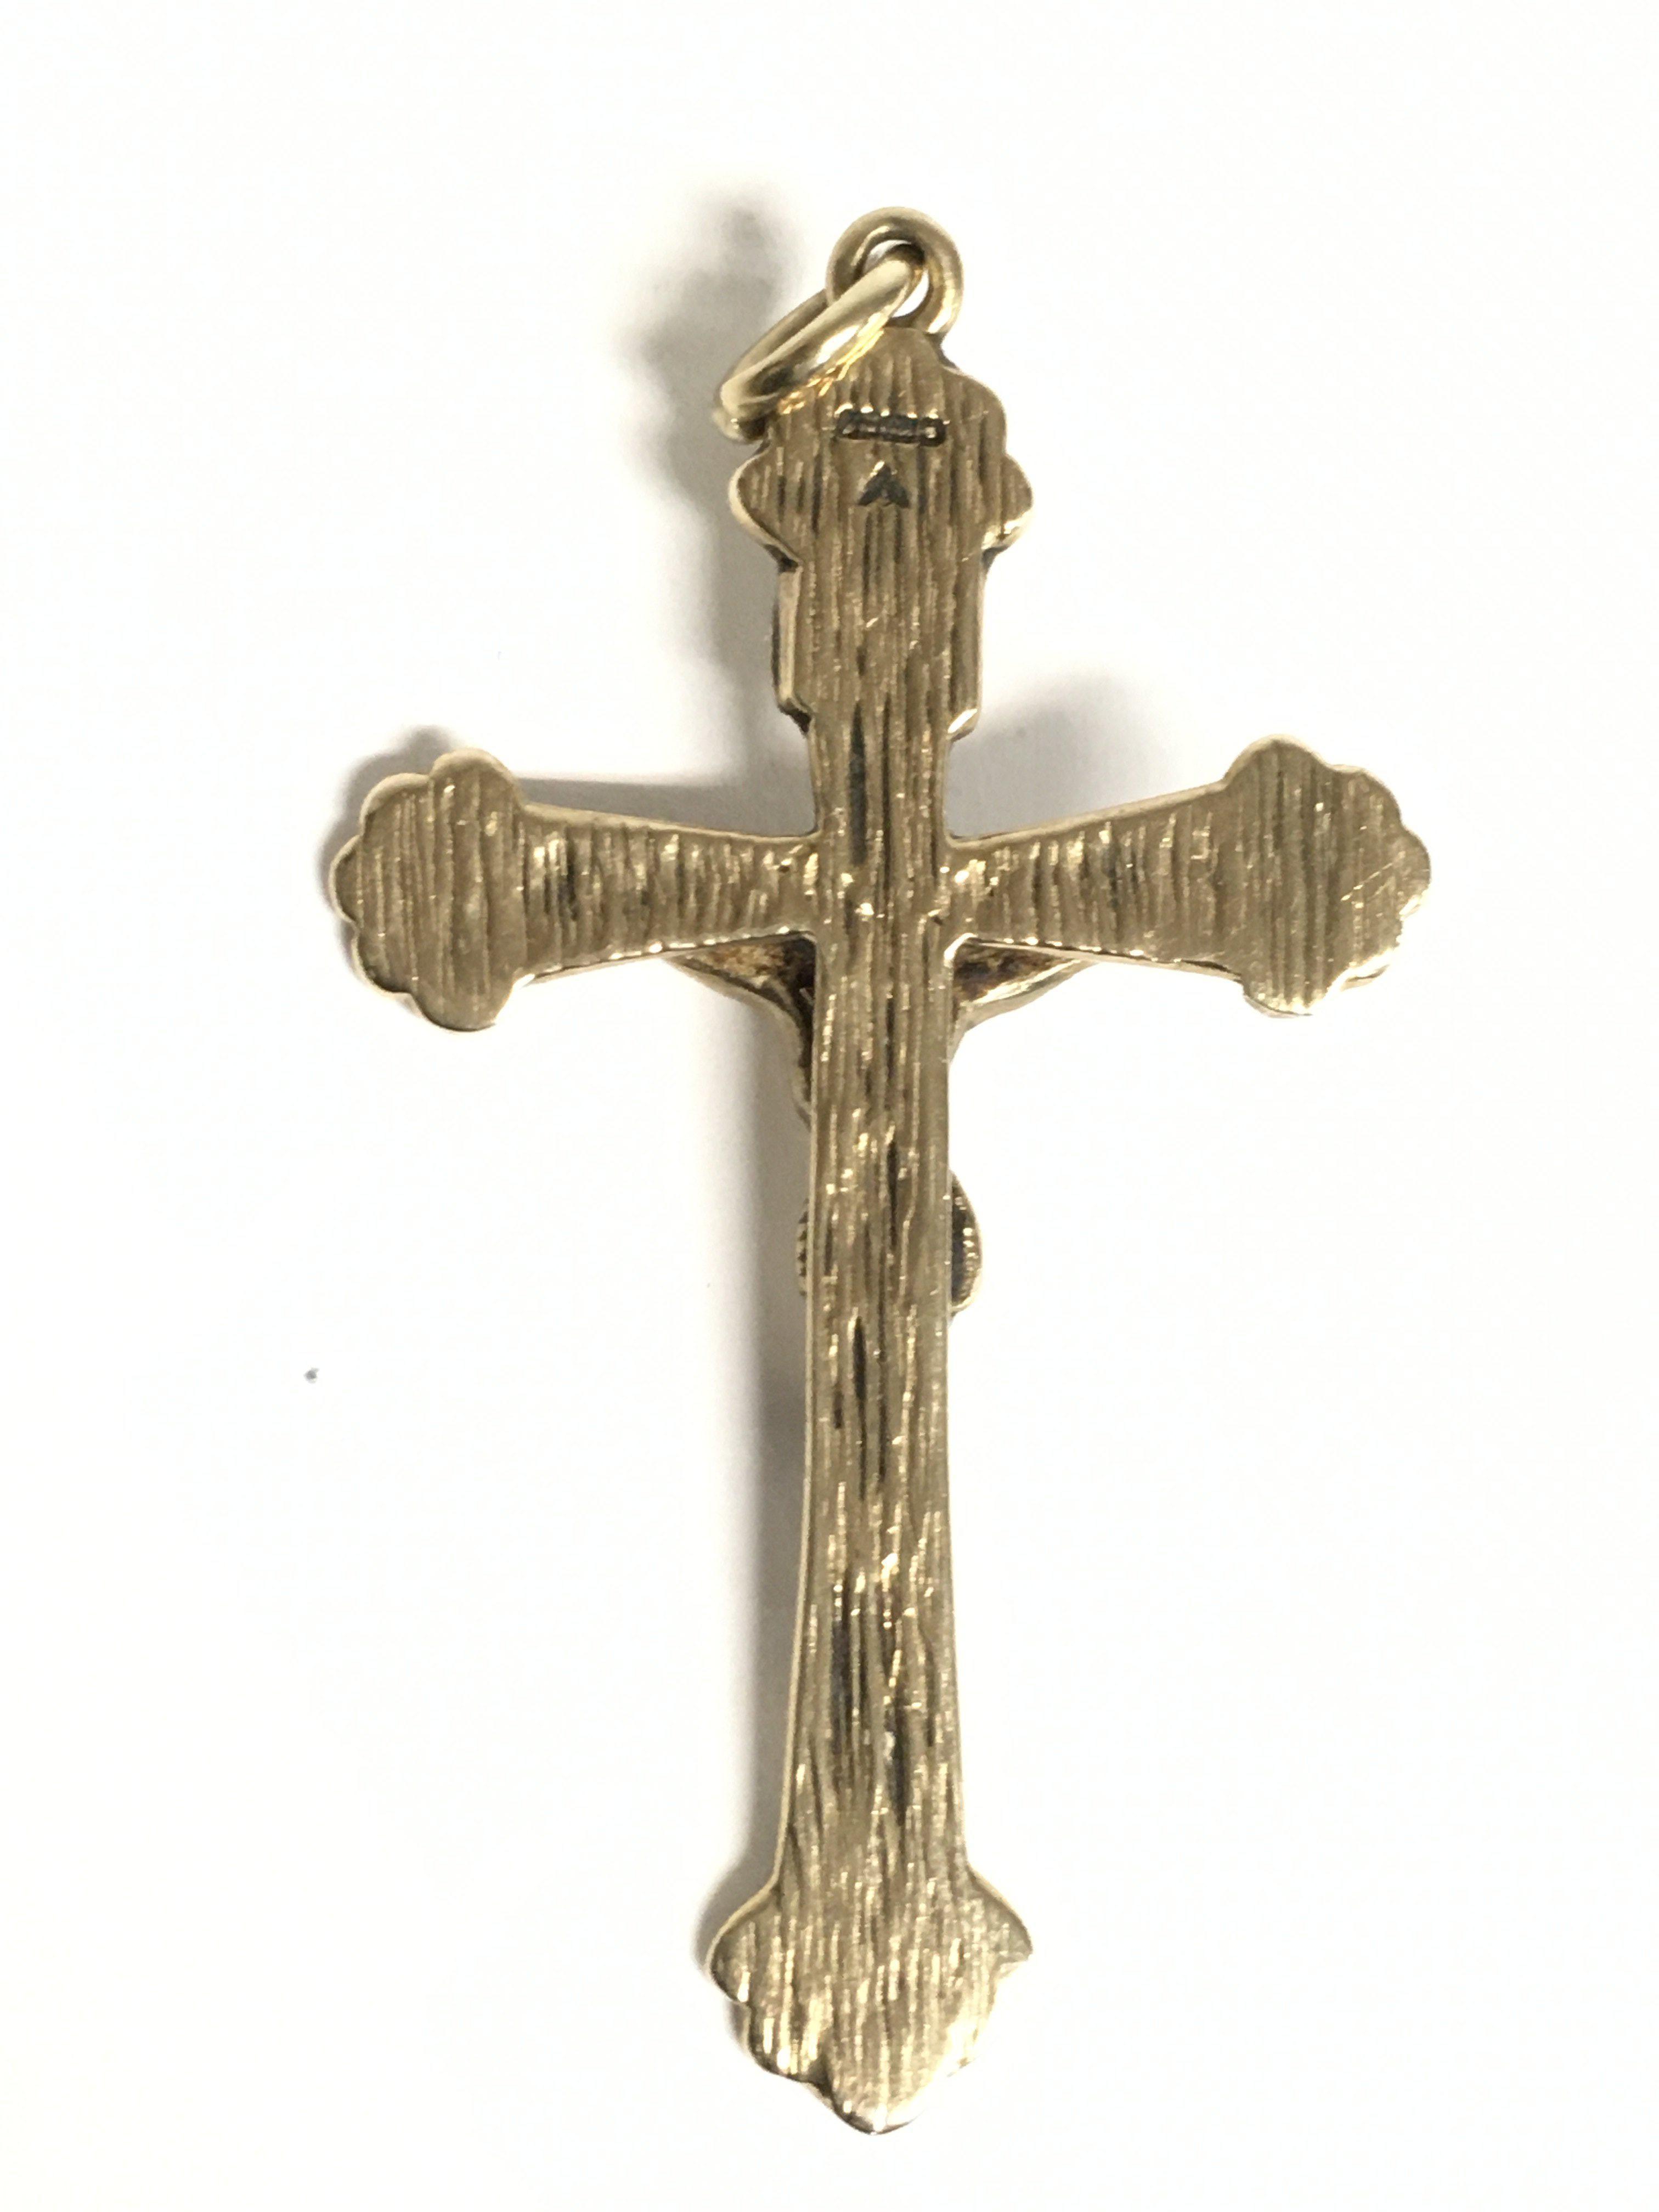 A 9ct gold cross pendant. Approximately 6cm long. - Image 2 of 2